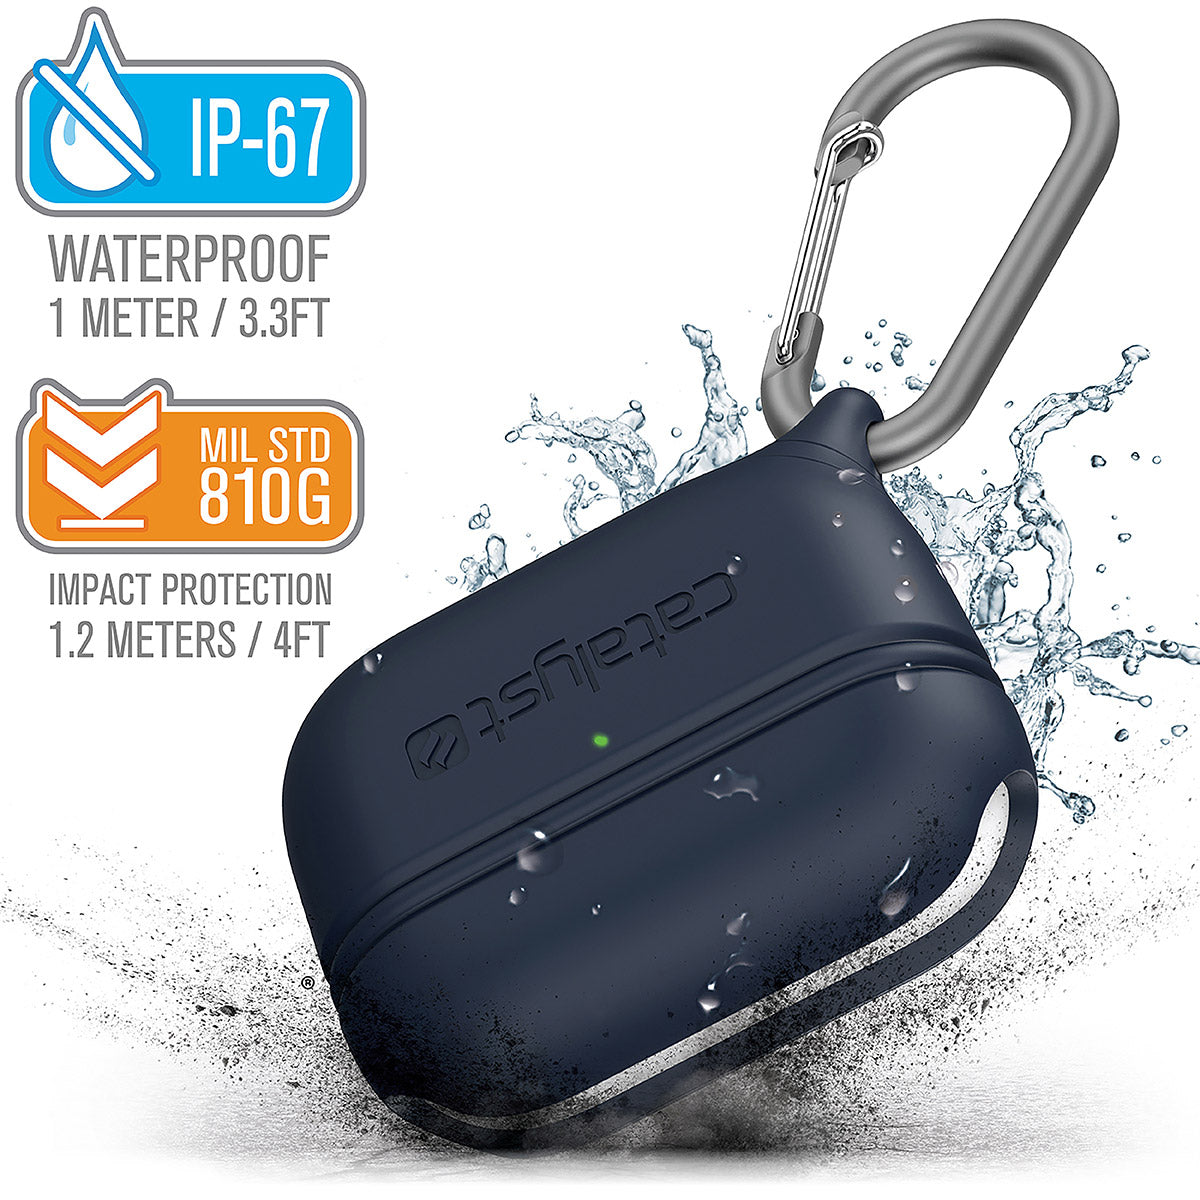 catalyst airpods pro gen 2 1 waterproof case carabiner special edition blue with cracked floor and splashes of water text reads ip-67 waterproof 1 meter 3.3ft mil std 810g impact protection 1.2 meters 4ft